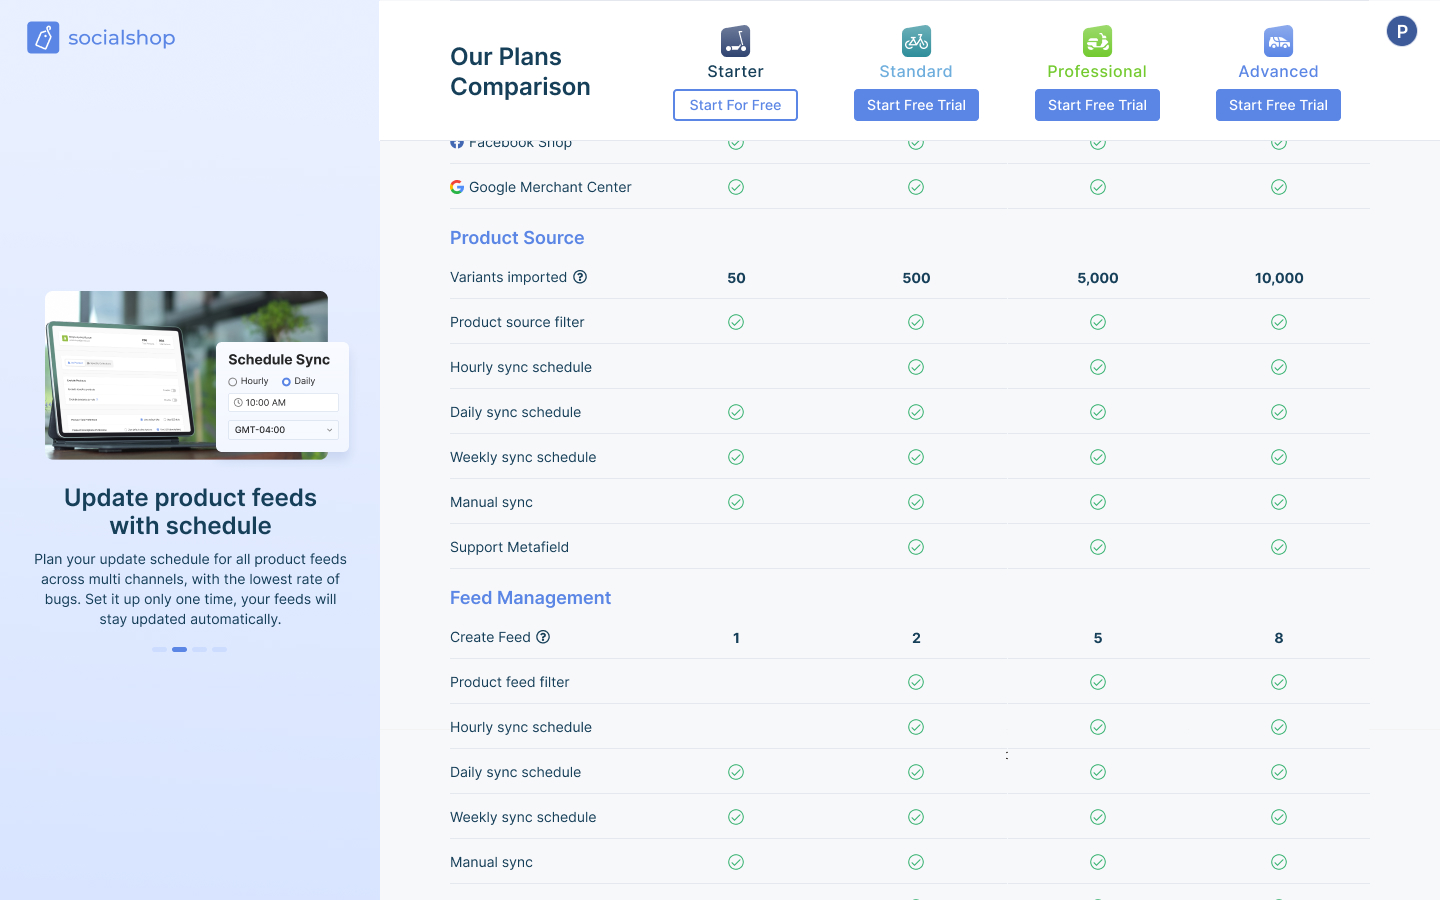 Take a look at the Socialshop Pricing Plan Comparison